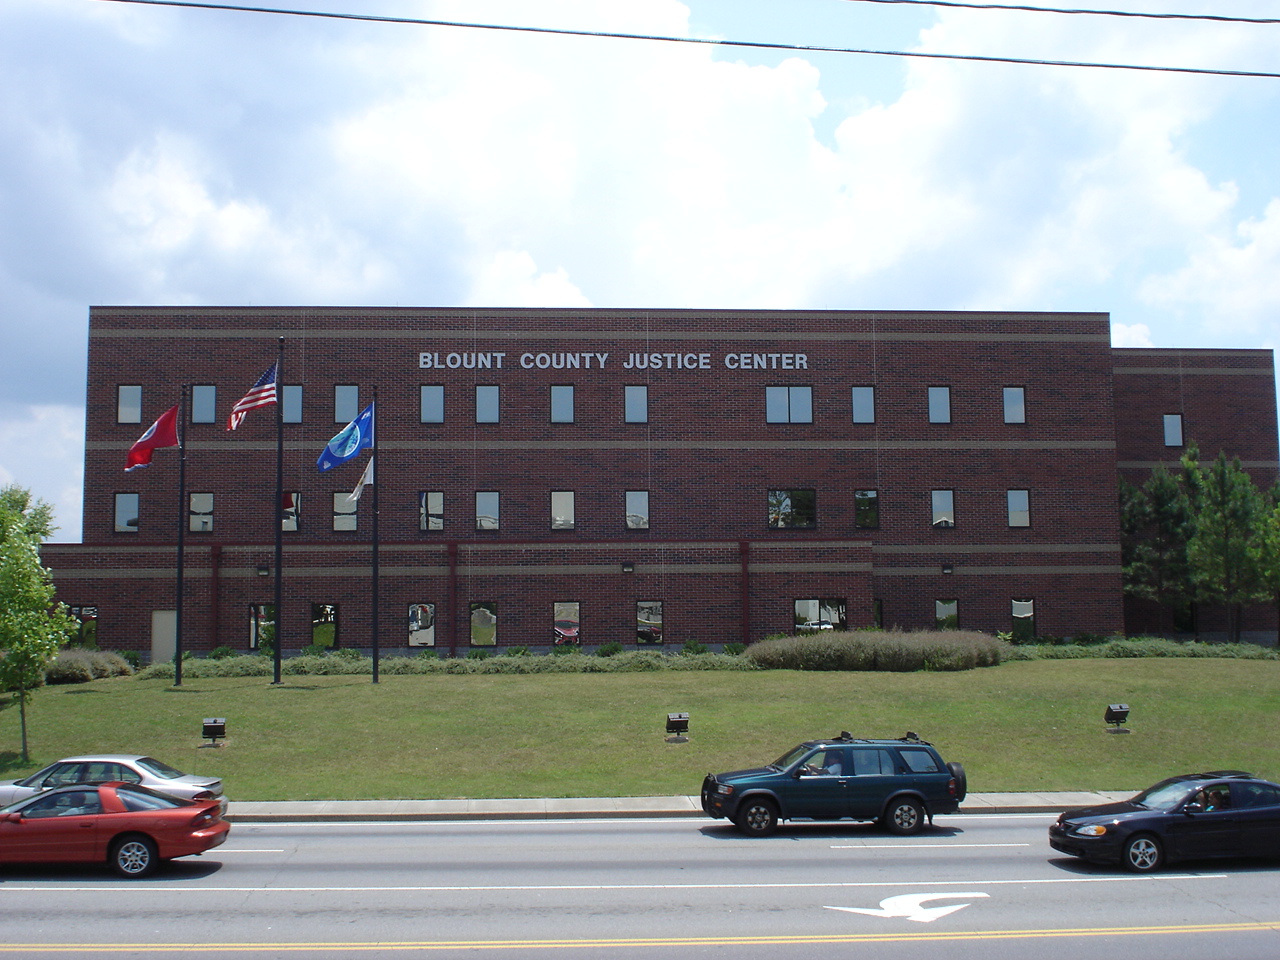 Blount County Justice Center